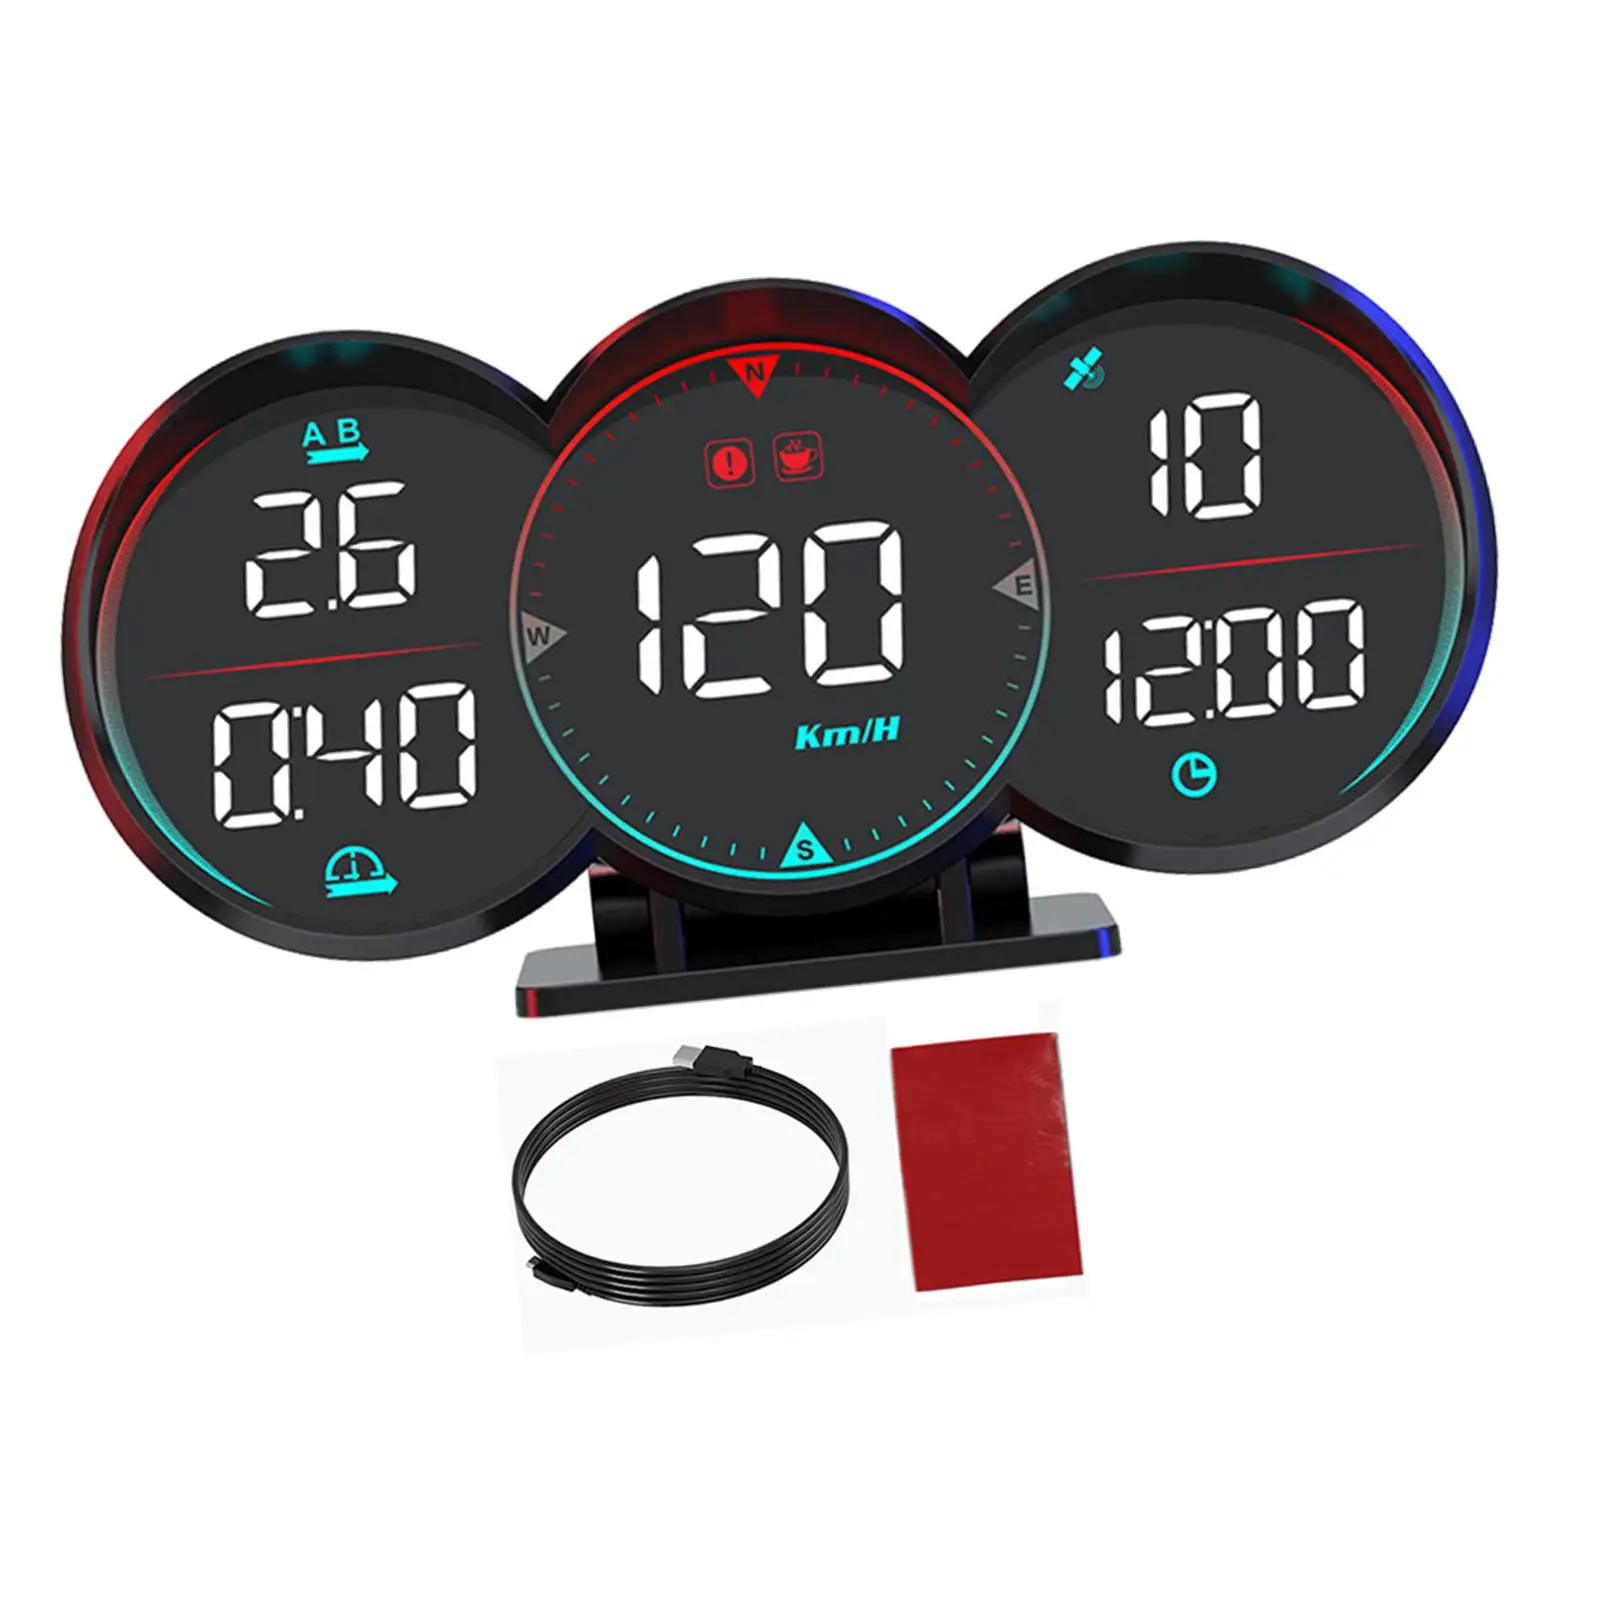 G17 GPS HUD 360 Degree Rotation Compass Digital GPS Speedometer for Car for Outdoor All Vehicles Travel Vehicle Supplies